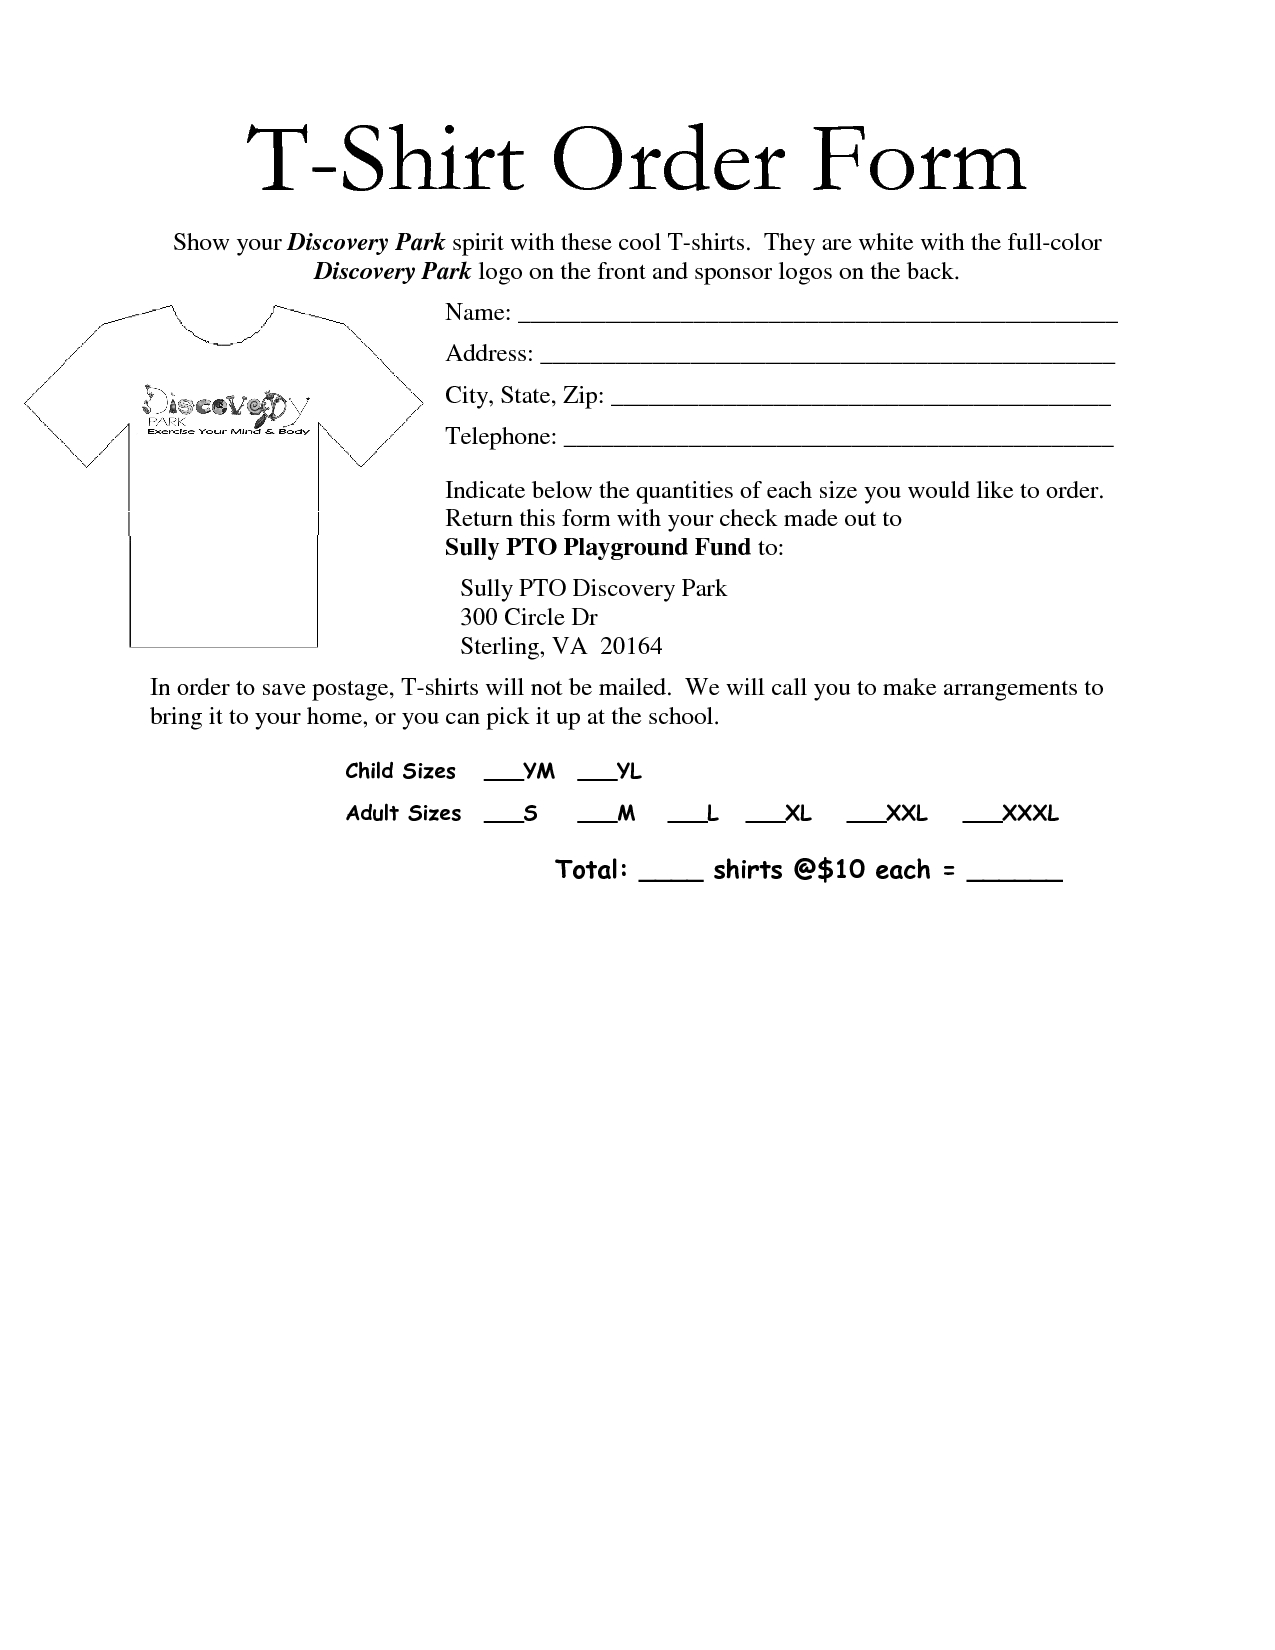 Awesome Tshirt Order Form Template Free Images  Projects To Try with regard to Blank T Shirt Order Form Template